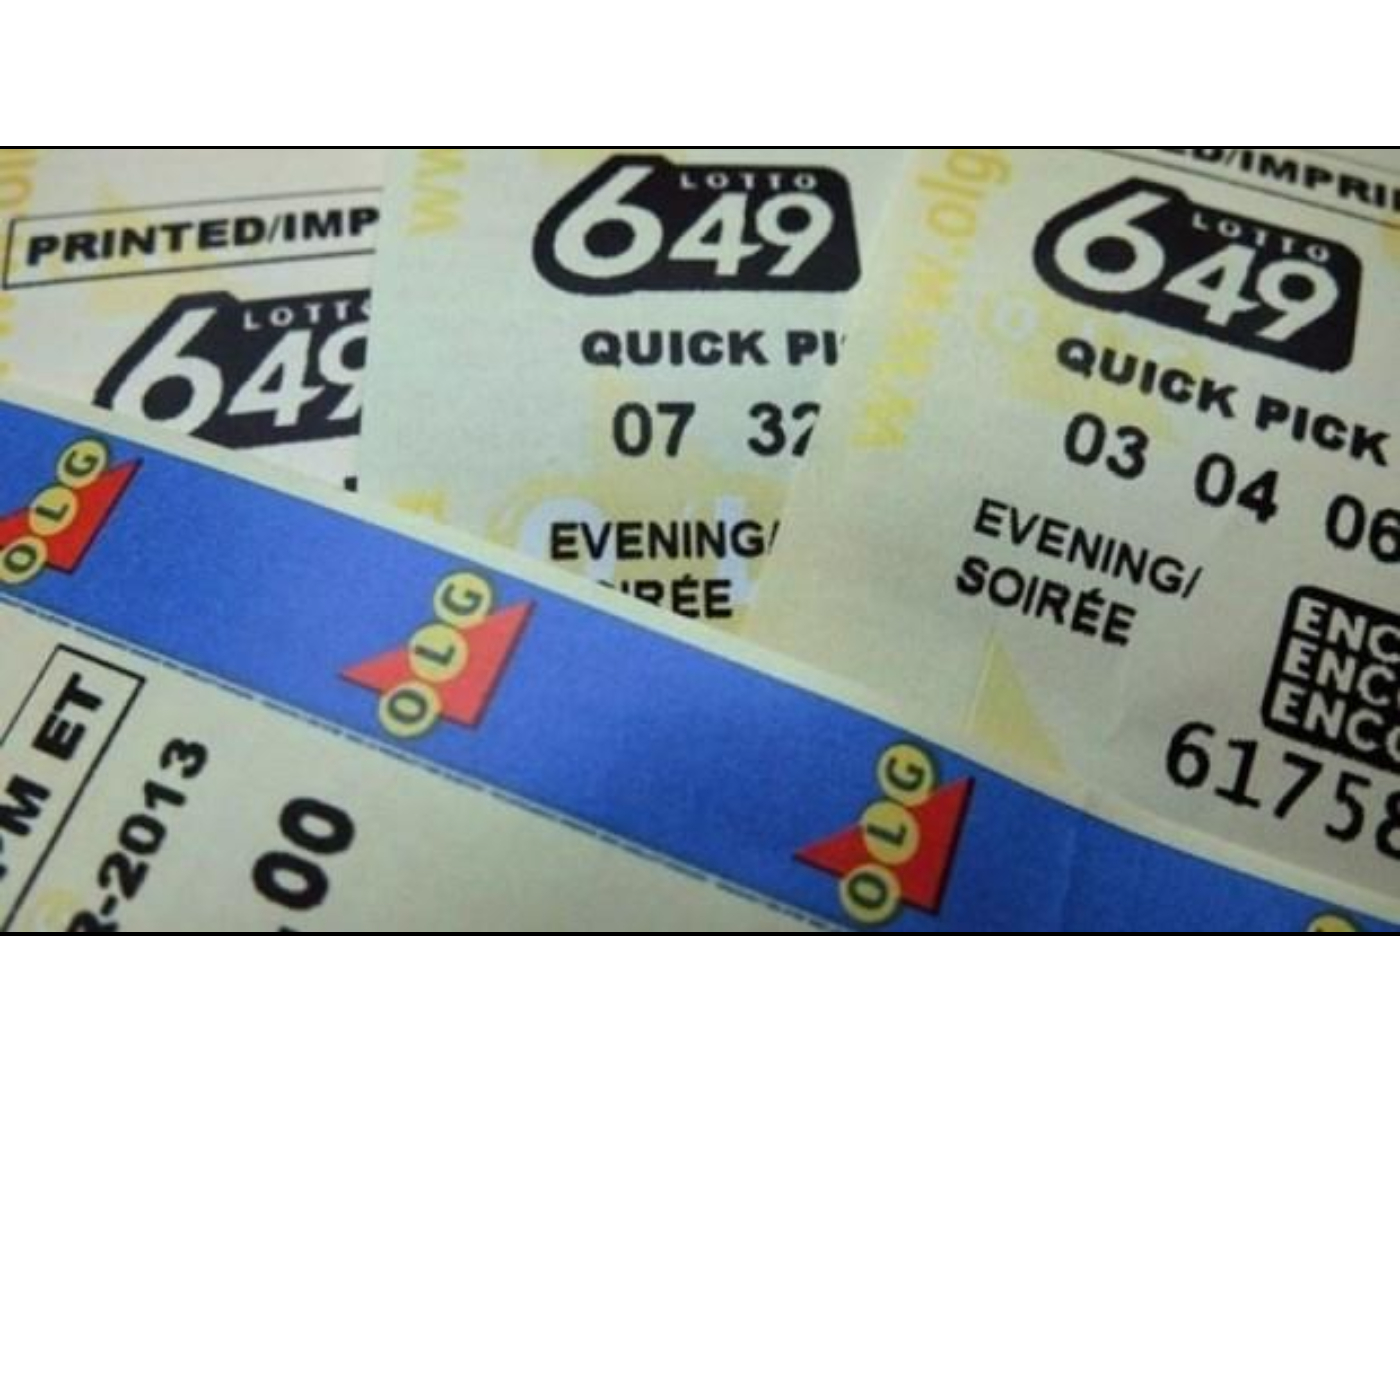 This weekend's unofficial winning lottery numbers